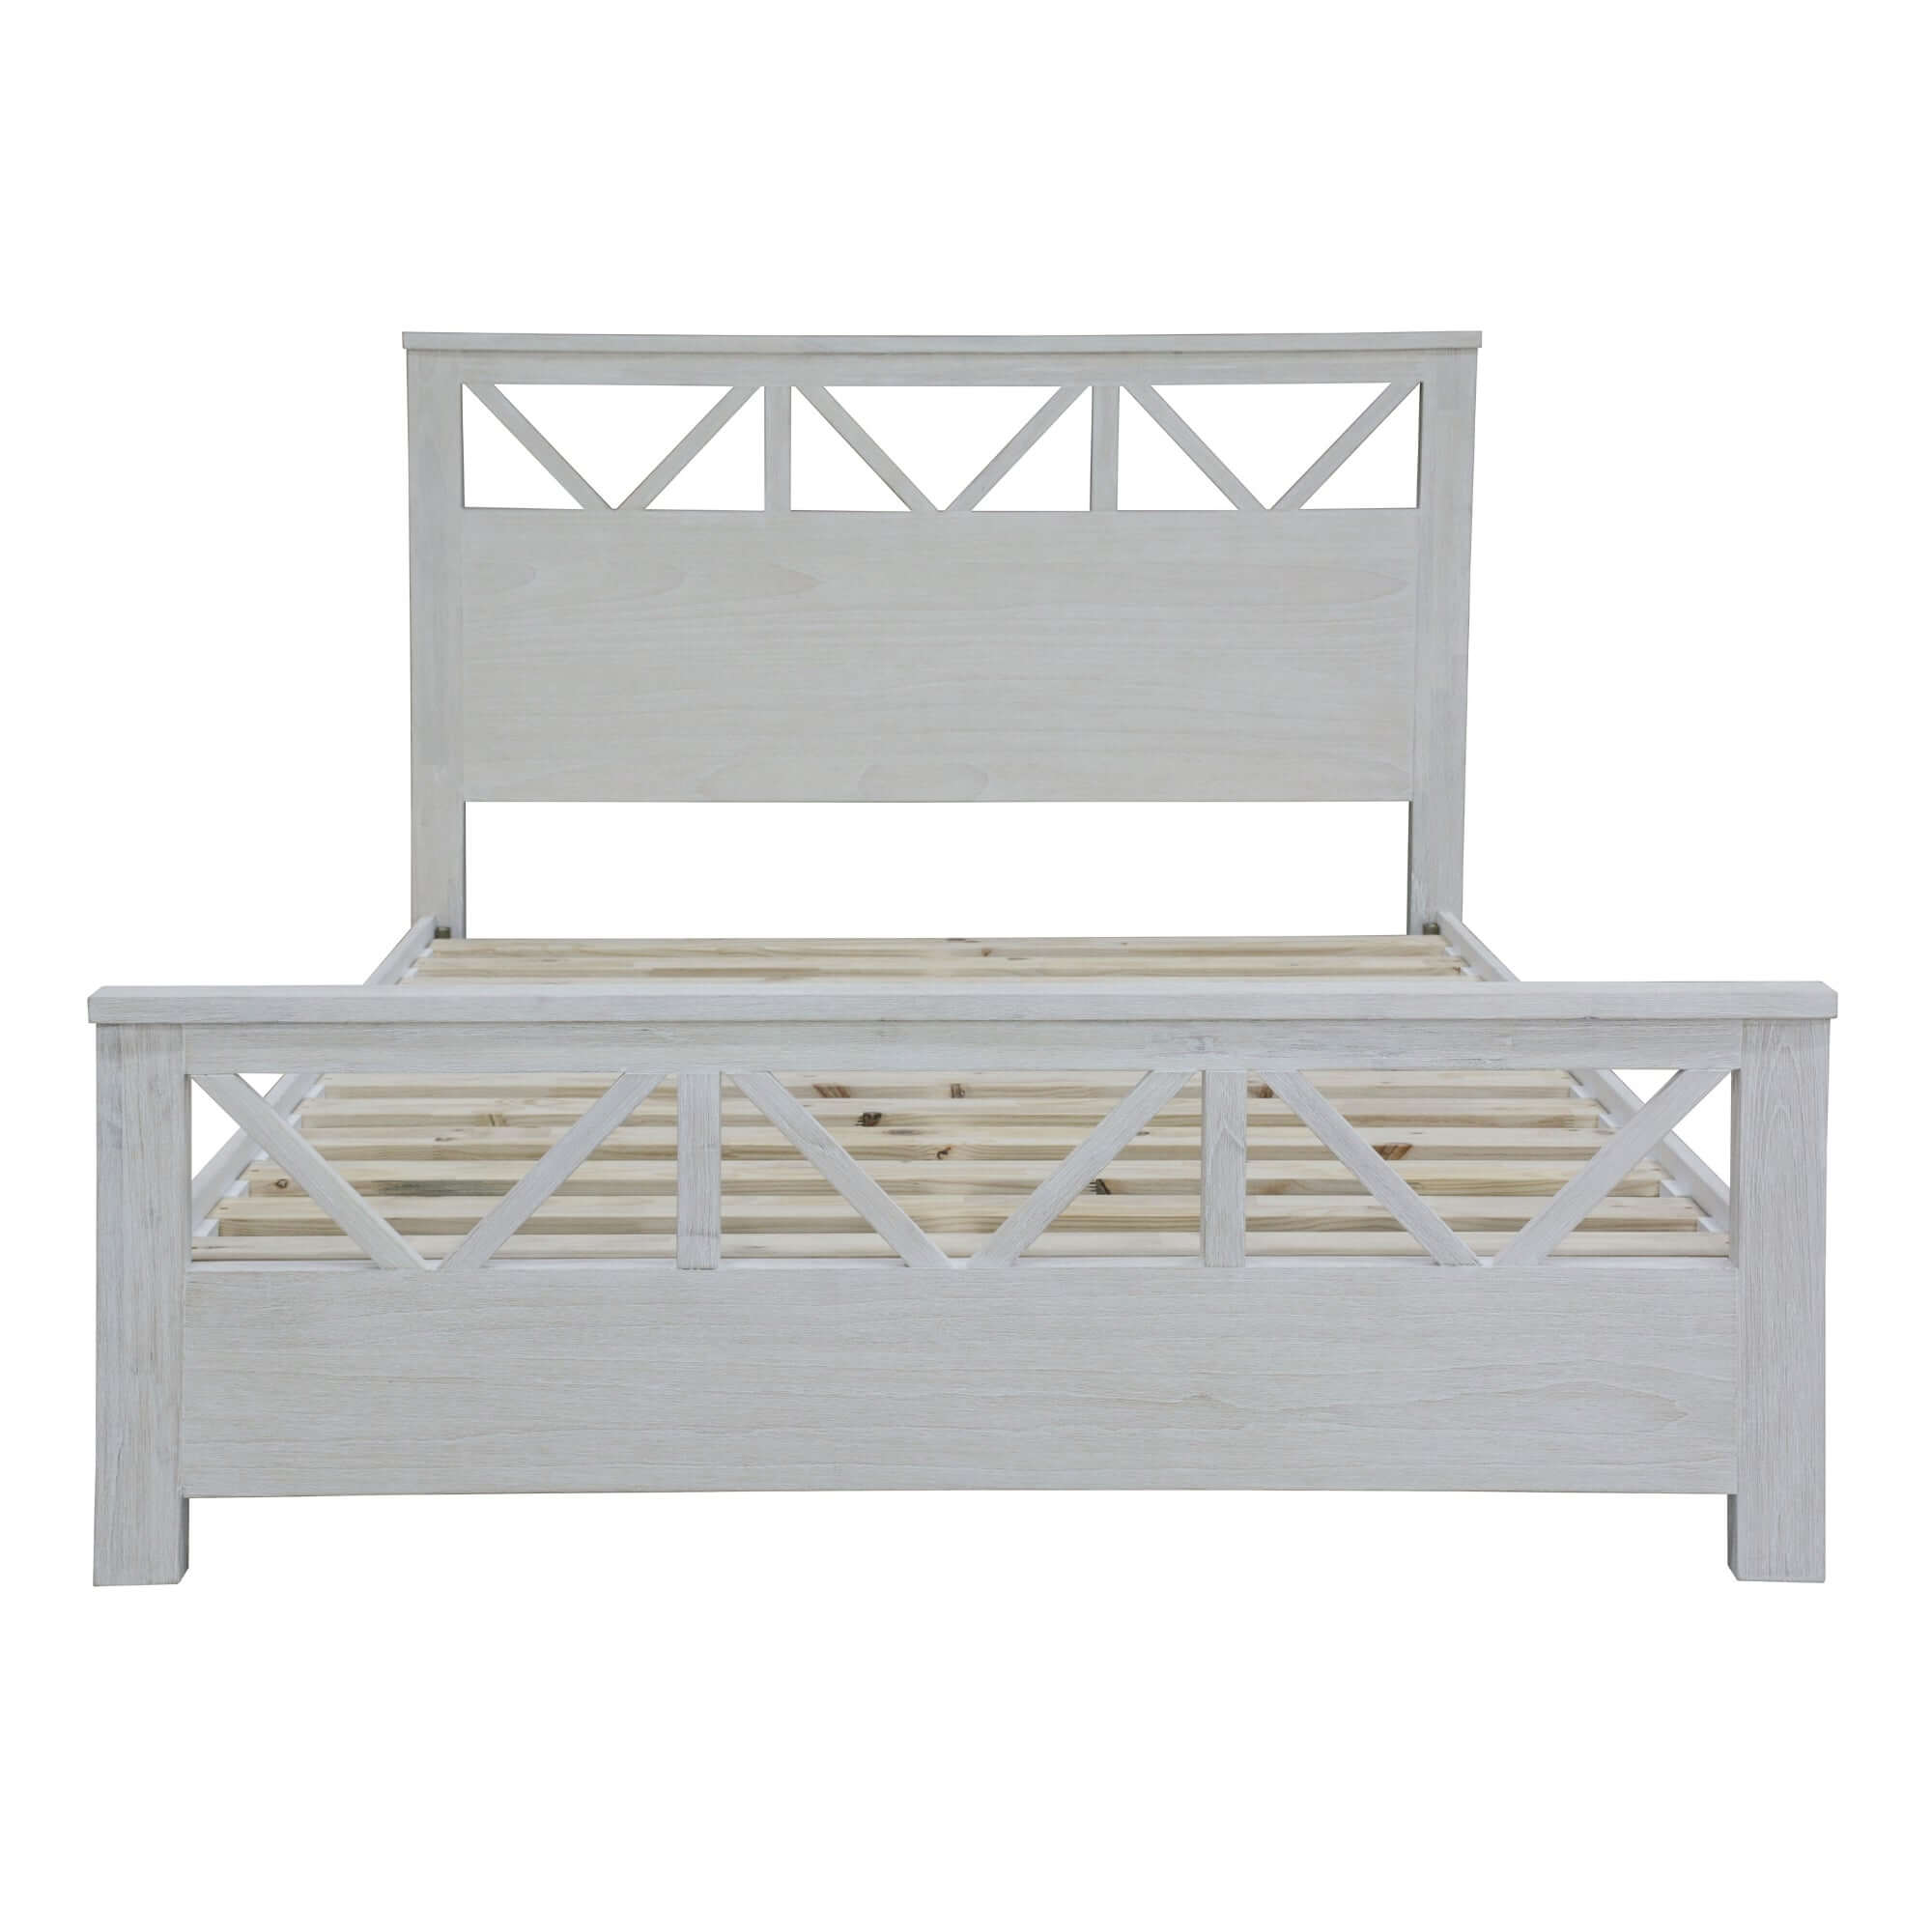 Myer Queen Size Bed Frame Solid Timber Wood Mattress Base White Wash-Upinteriors